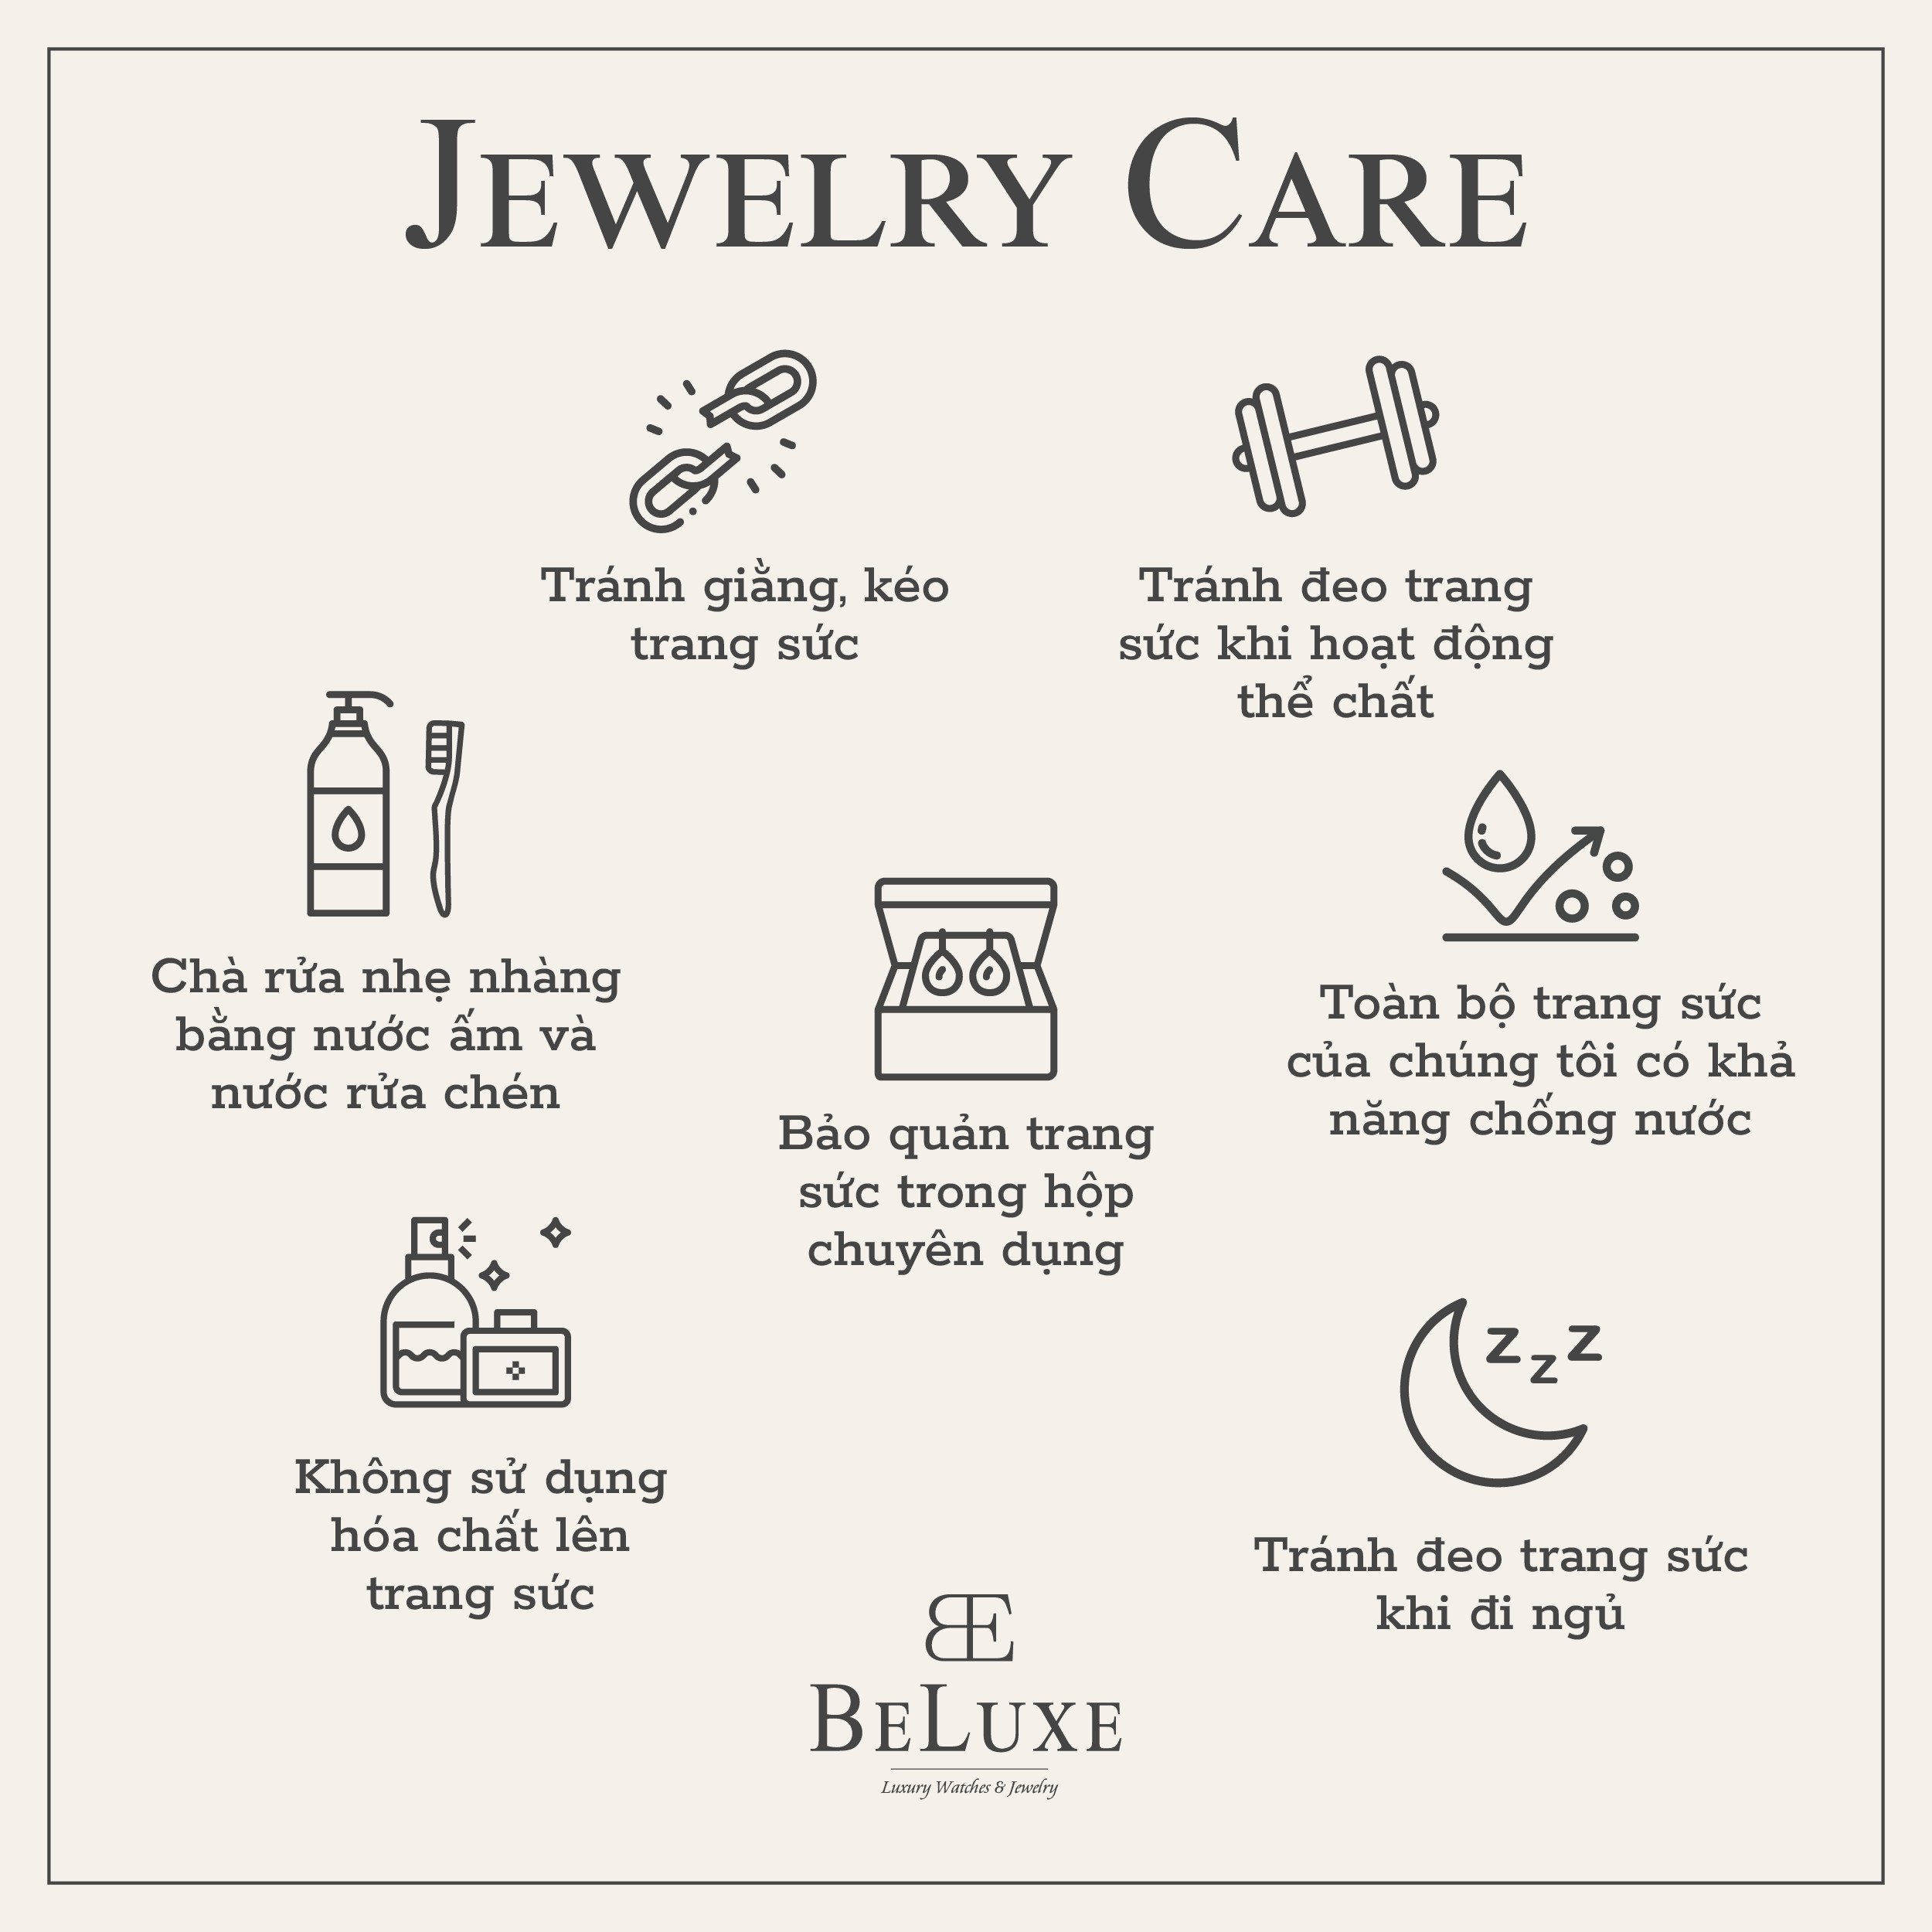 Jewelry Clean & Care